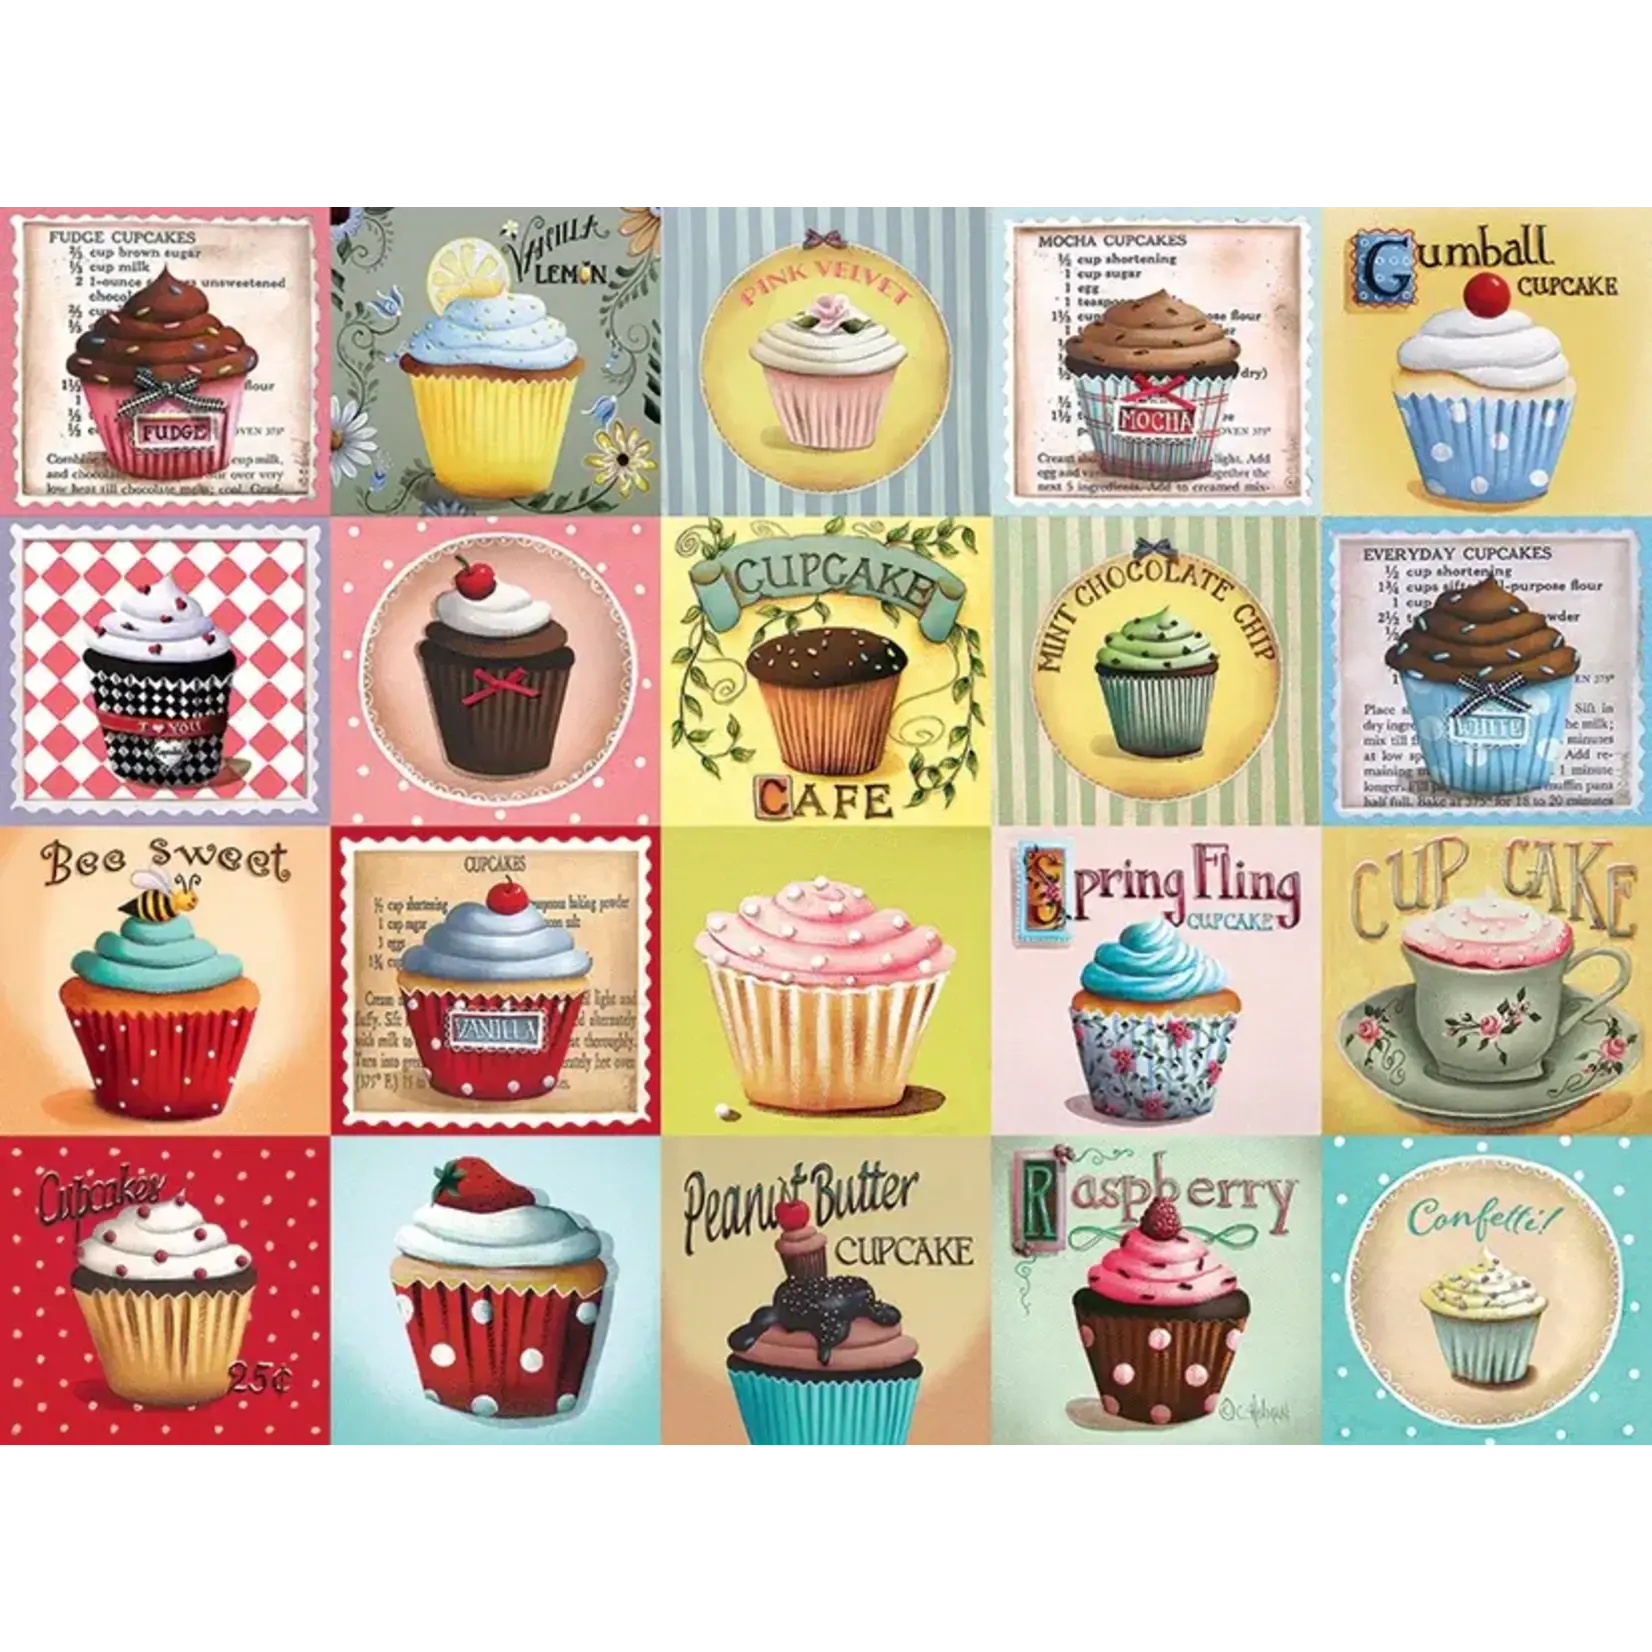 Cobble Hill Cupcake Cafe 275 pc